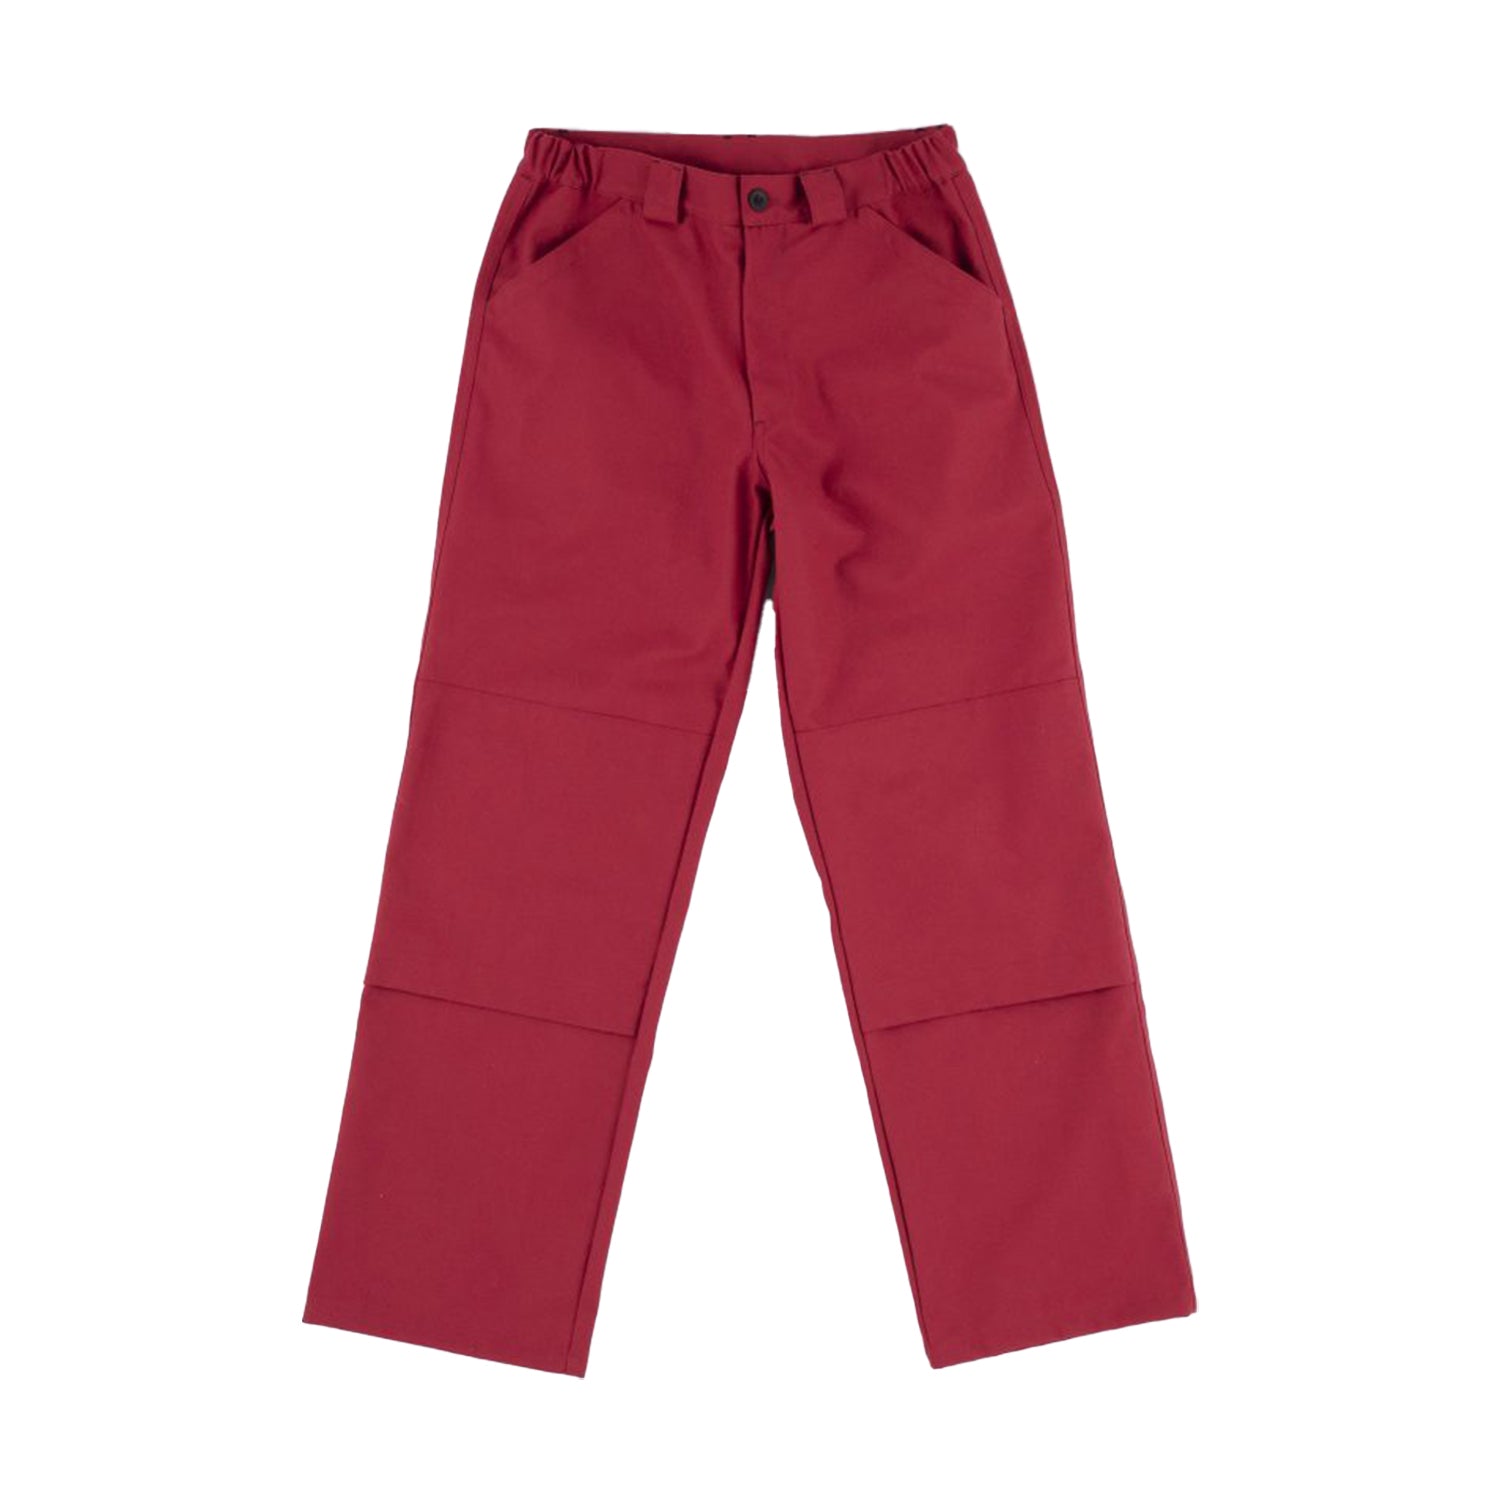 Replicated KLM Pants (Fire Red)